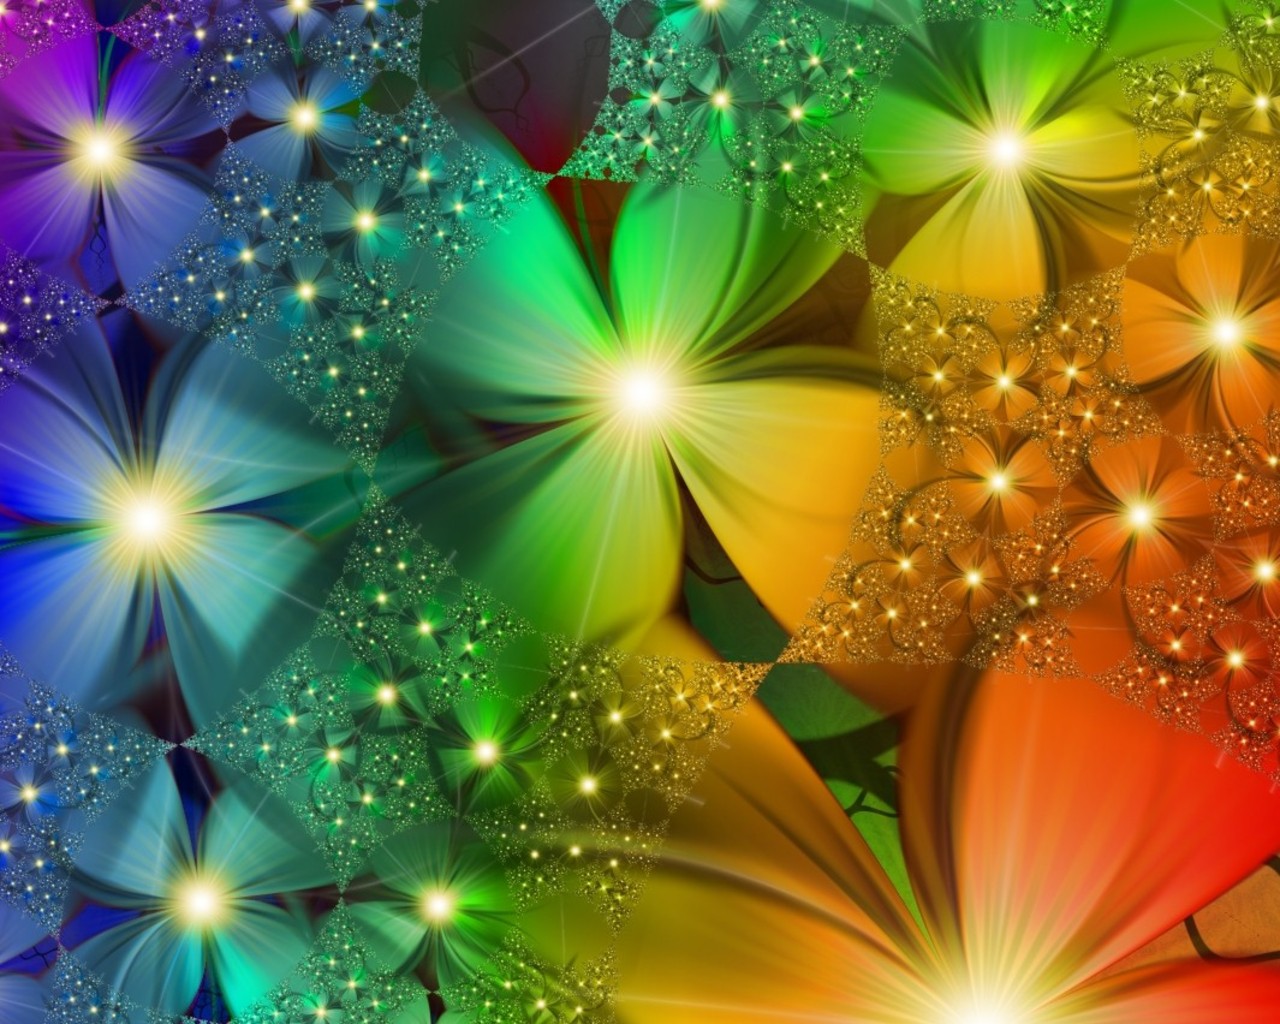 Colorful 3D Wallpapers HD wallpaper background